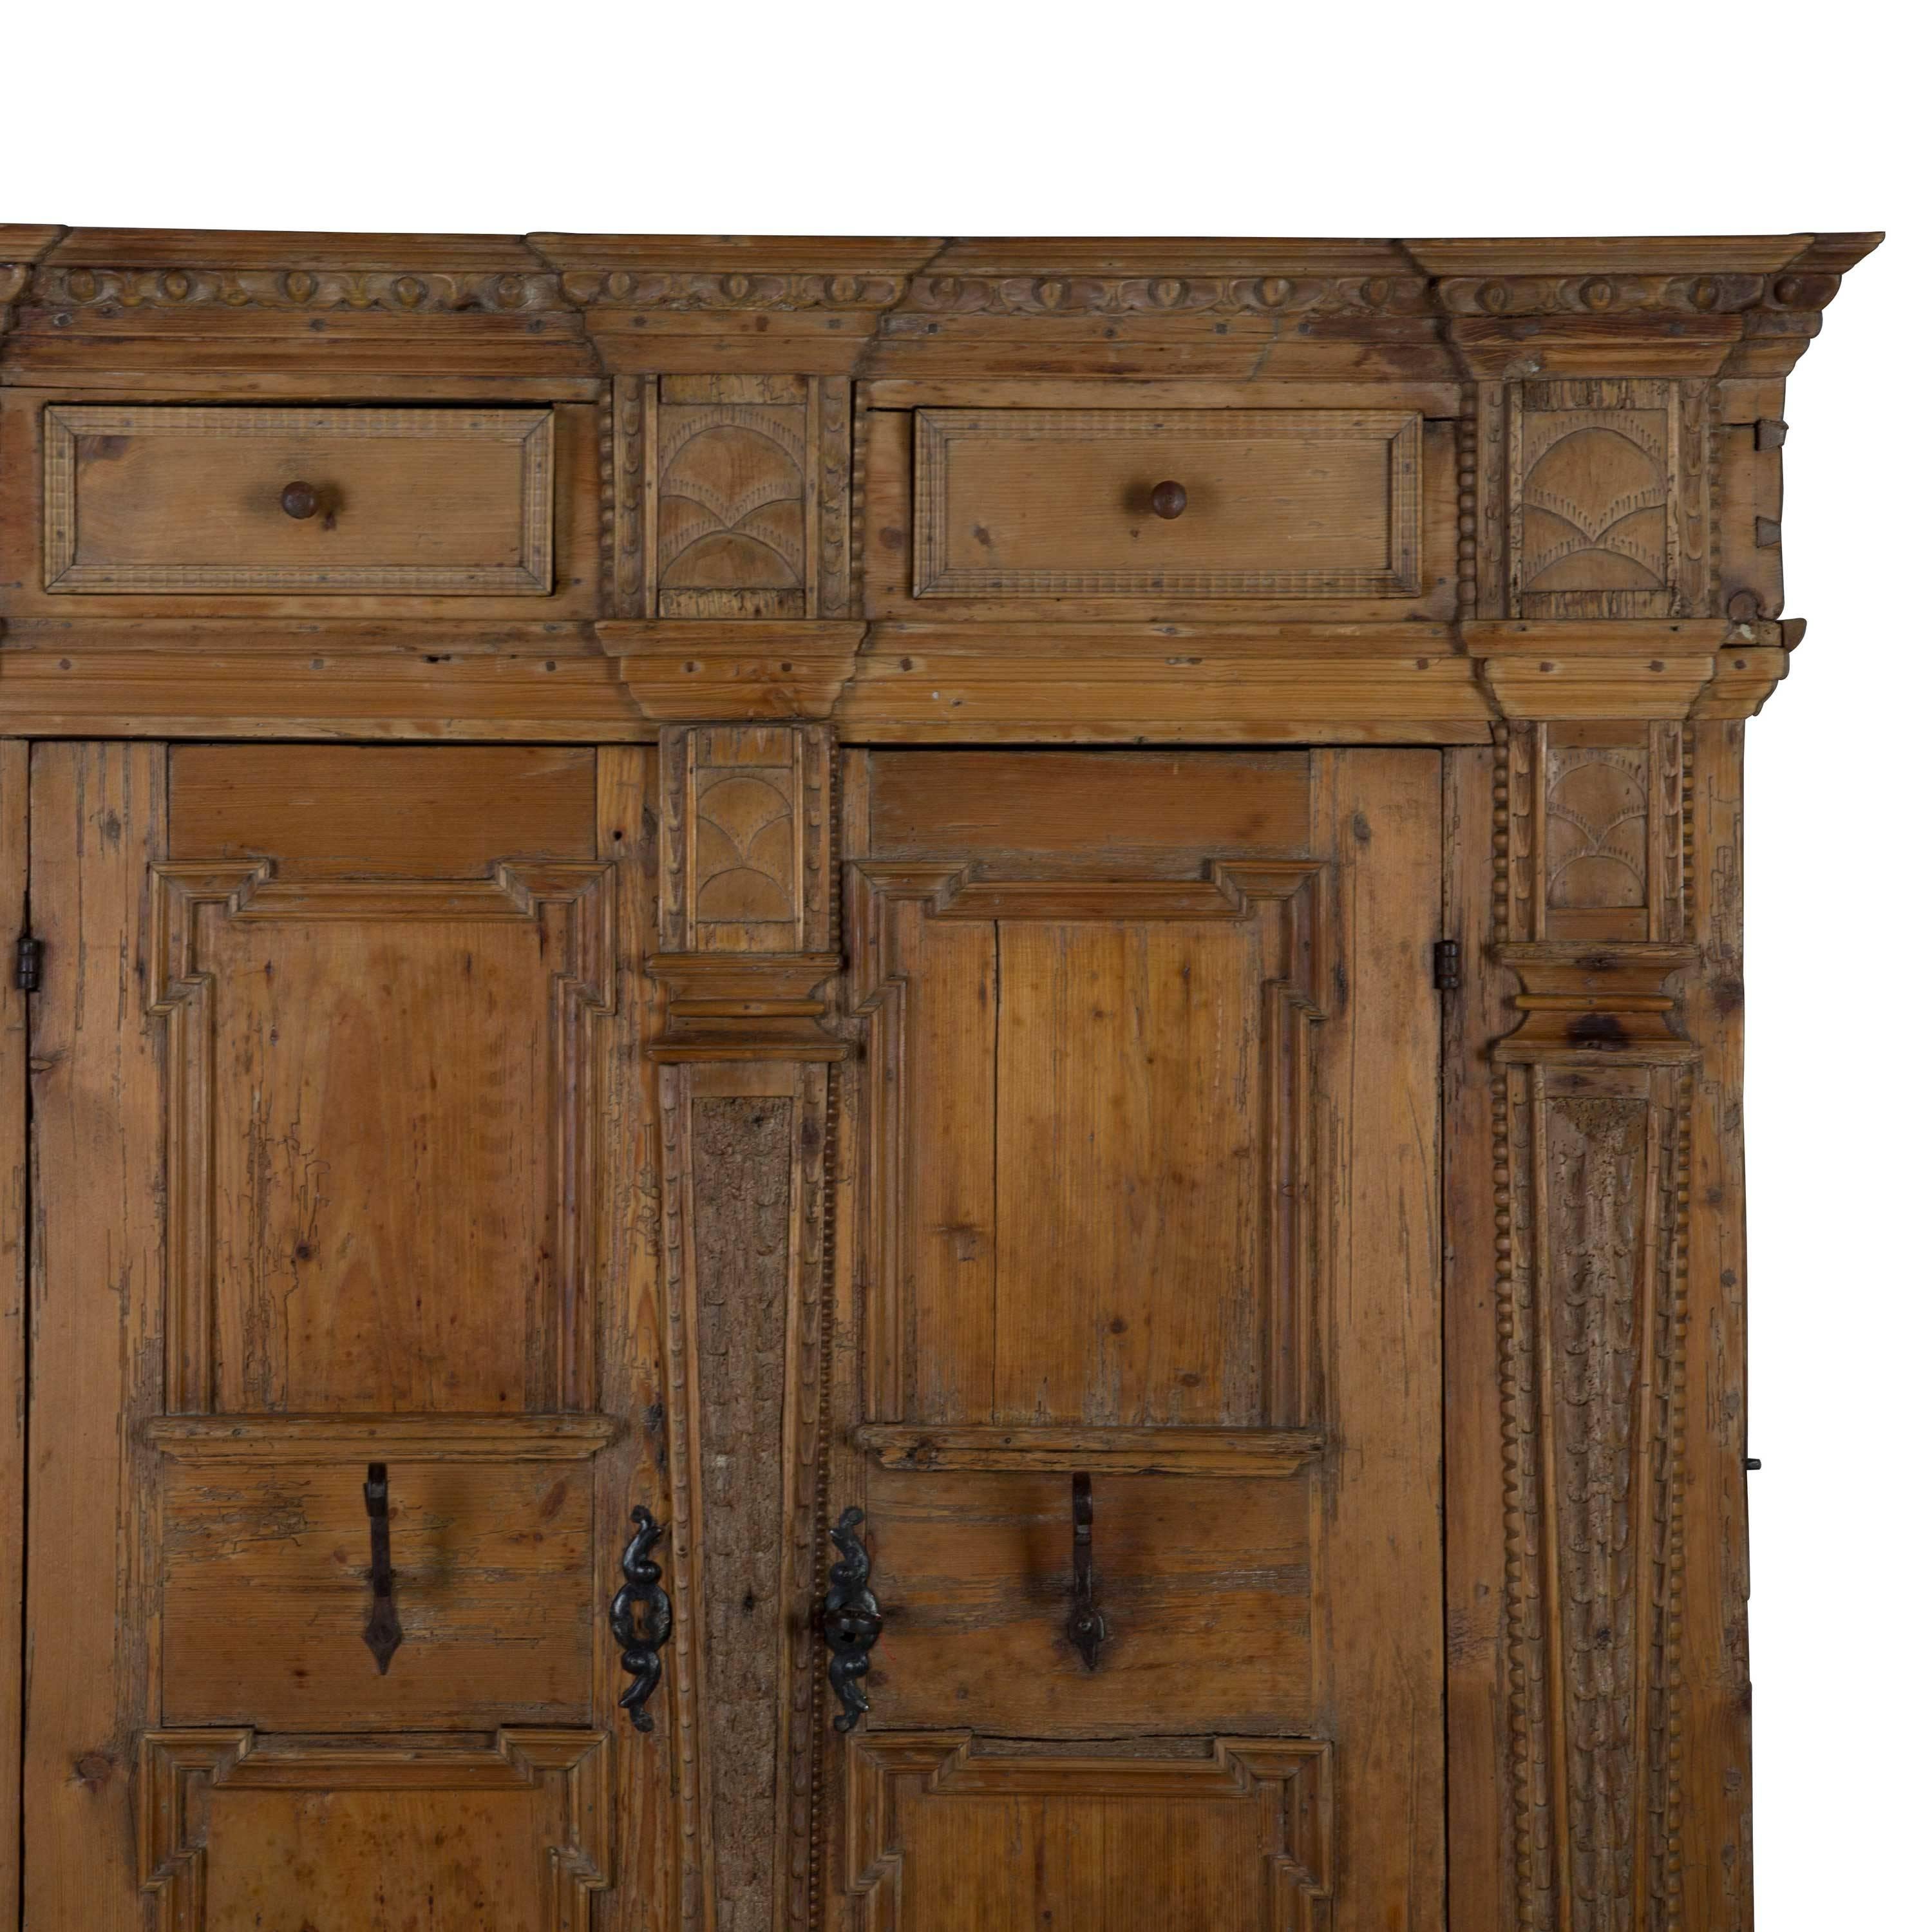 Wood 17th Century Architectural Armoire